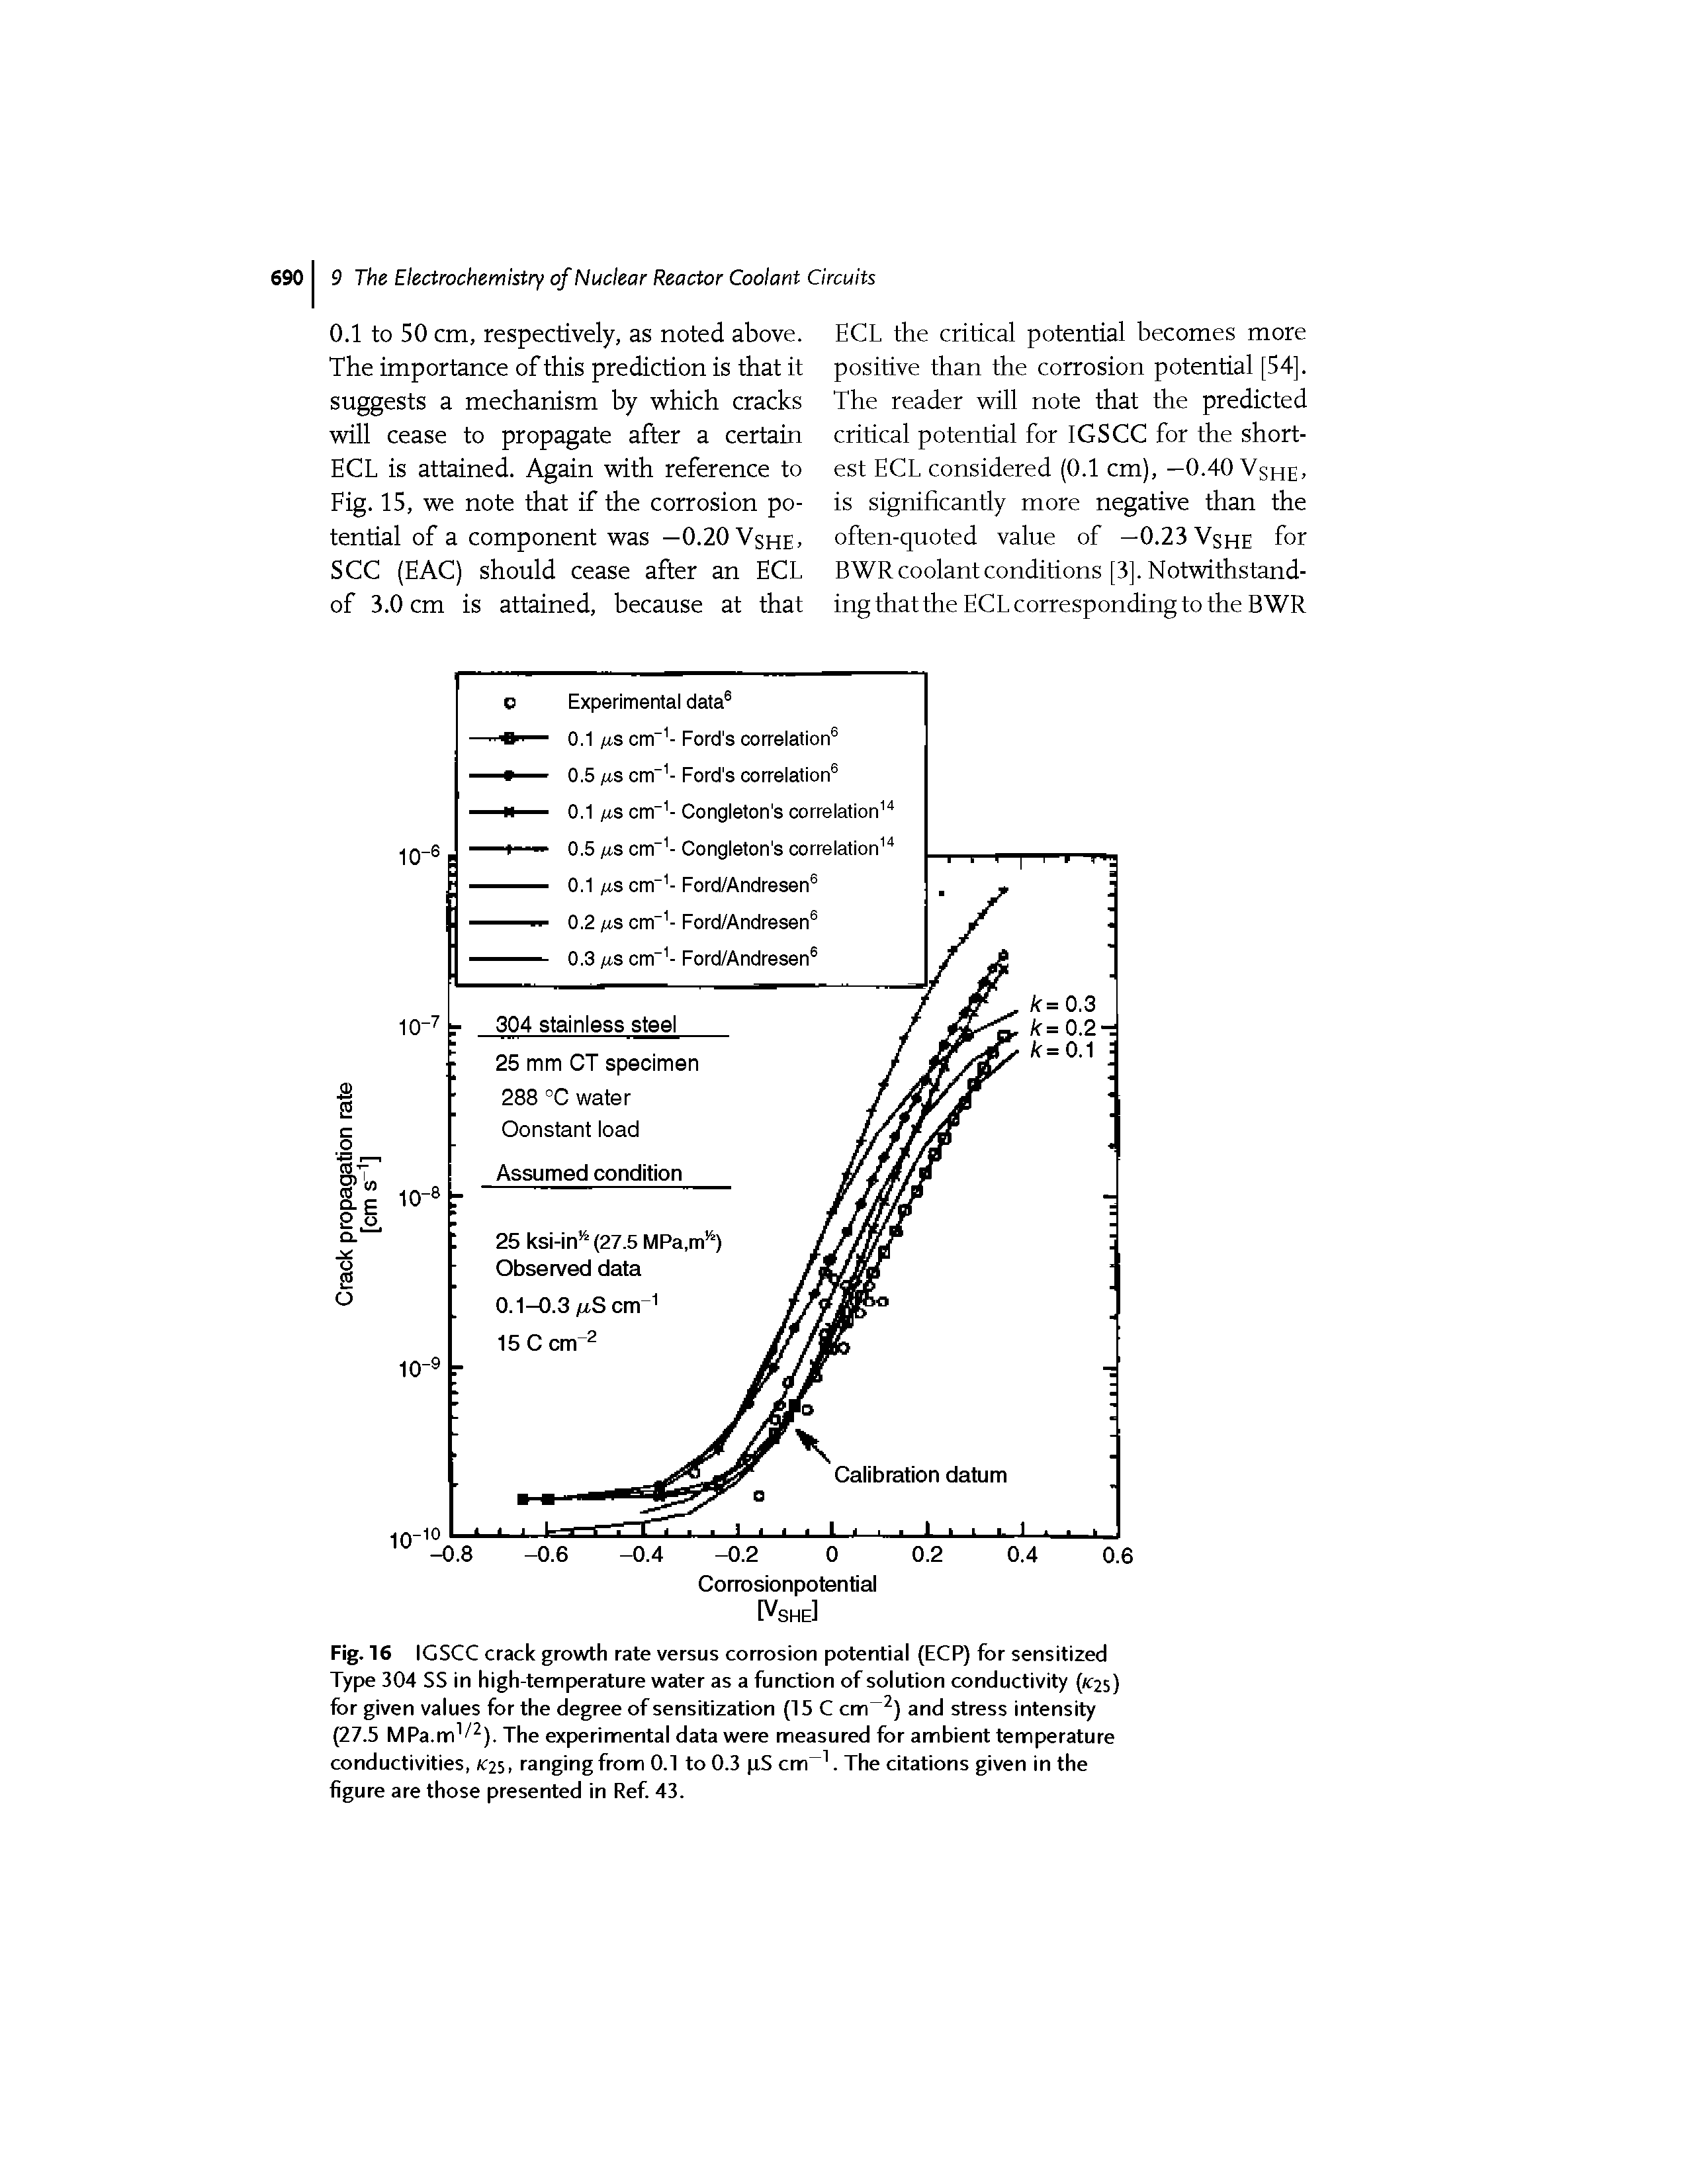 Fig. 16 IGSCC crack growth rate versus corrosion potential (ECP) for sensitized Type 304 SS in high-temperature water as a function of solution conductivity (rc25) for given values for the degree of sensitization (15 C cm 2) and stress intensity (27.5 MPa.m1/ 2). The experimental data were measured for ambient temperature conductivities, K2S, ranging from 0.1 to 0.3 pS cm-1. The citations given in the figure are those presented in Ref. 43.